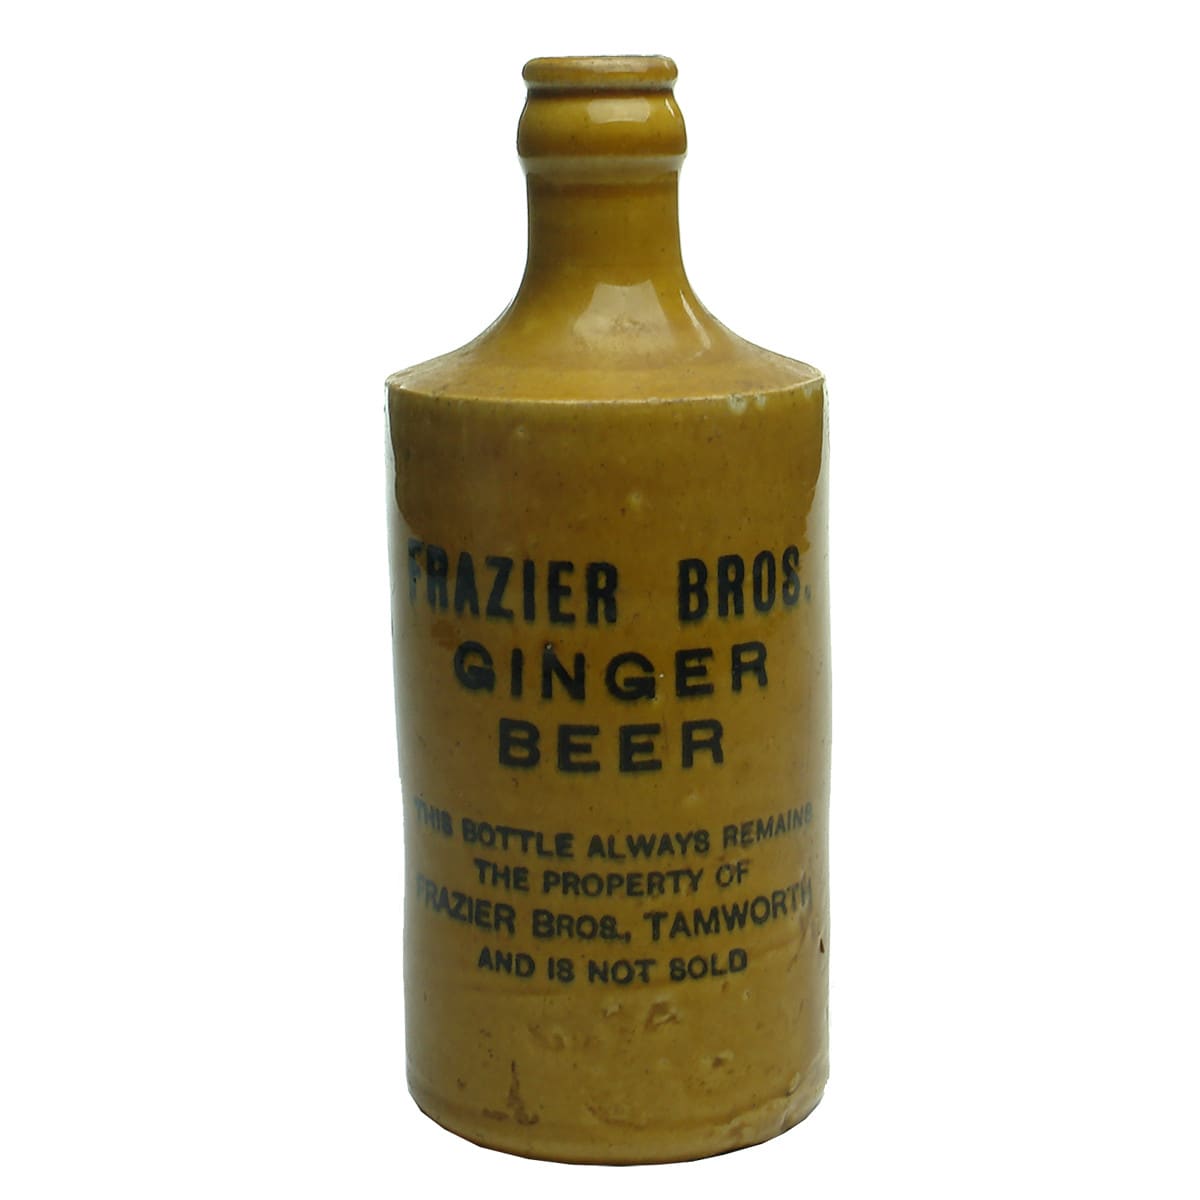 Ginger Beer. Frazier Bros., Tamworth. All Tan. Crown Seal. (New South Wales)